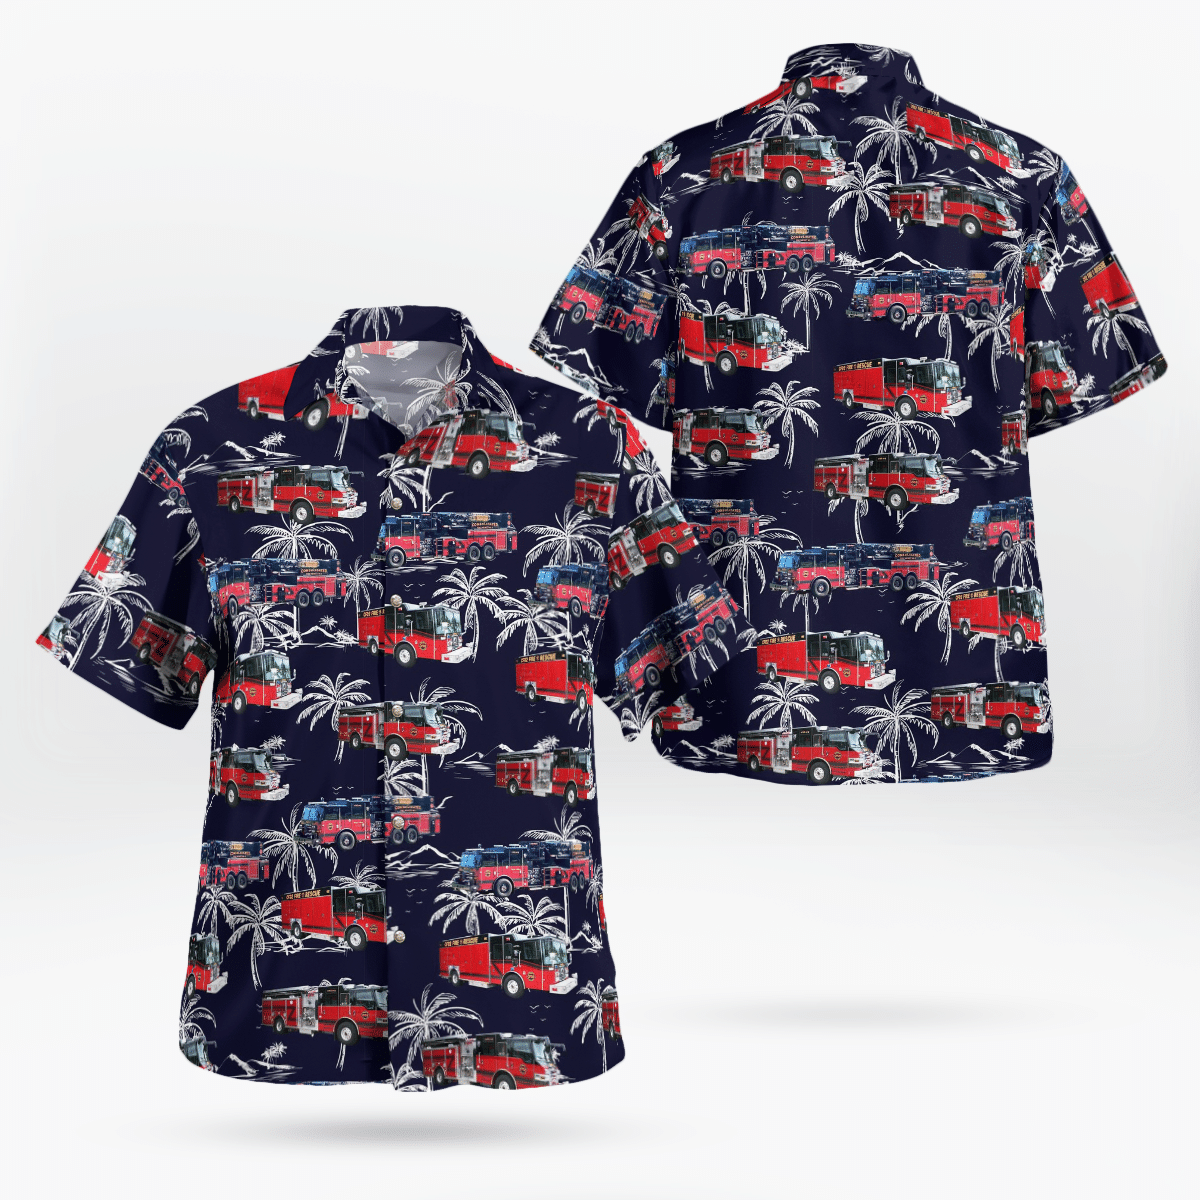 If you want to be noticed, wear These Trendy Hawaiian Shirt 66